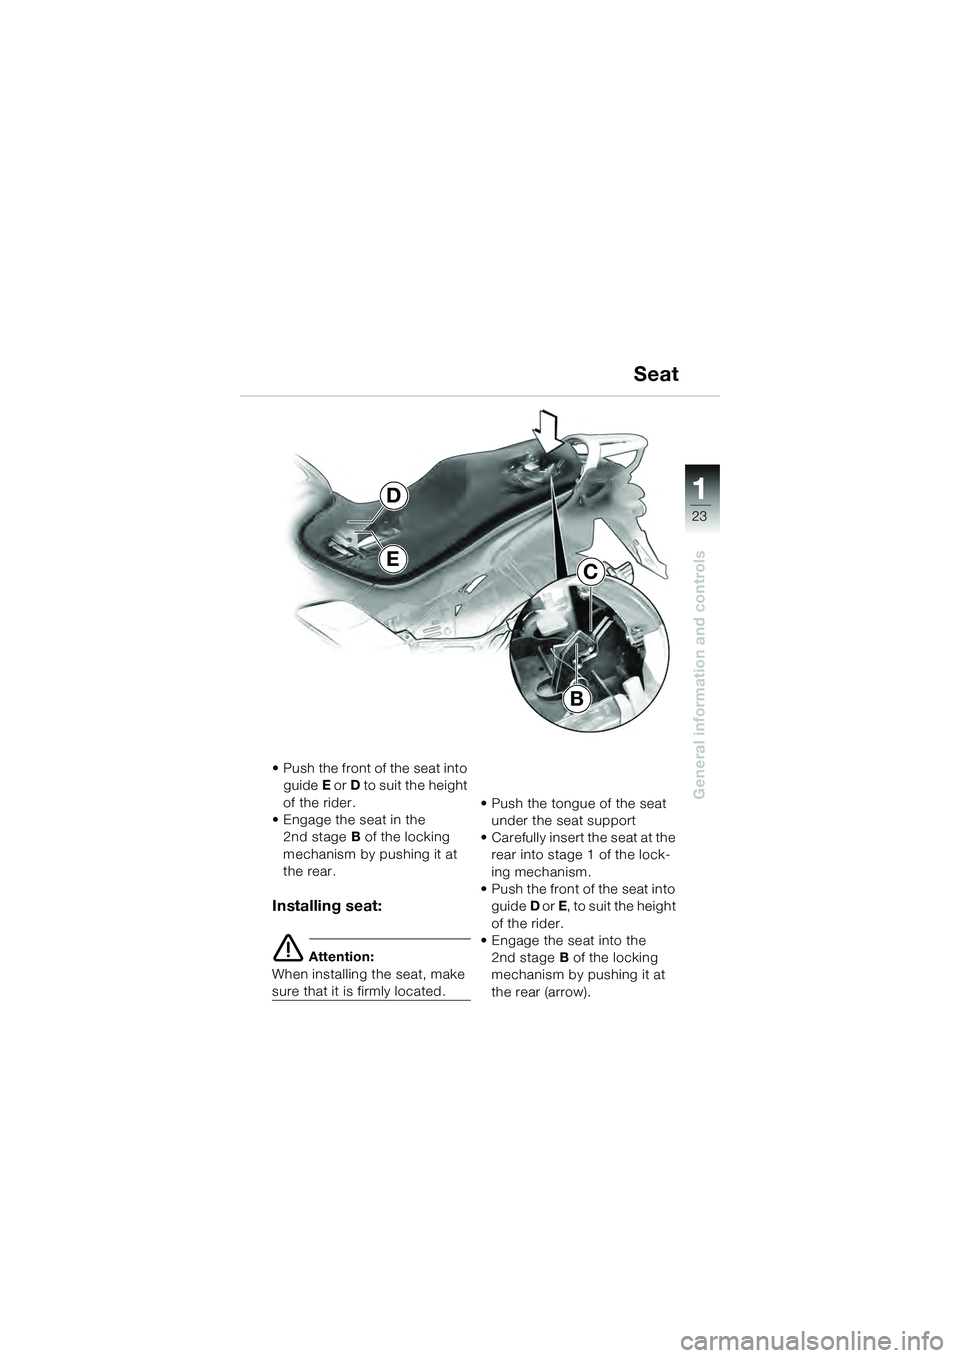 BMW MOTORRAD K 1200 GT 2004  Riders Manual (in English) 23
General information and controls
1
• Push the front of the seat into guide  E or  D to suit the height 
of the rider.
• Engage the seat in the  2nd stage B of the locking 
mechanism by pushing 